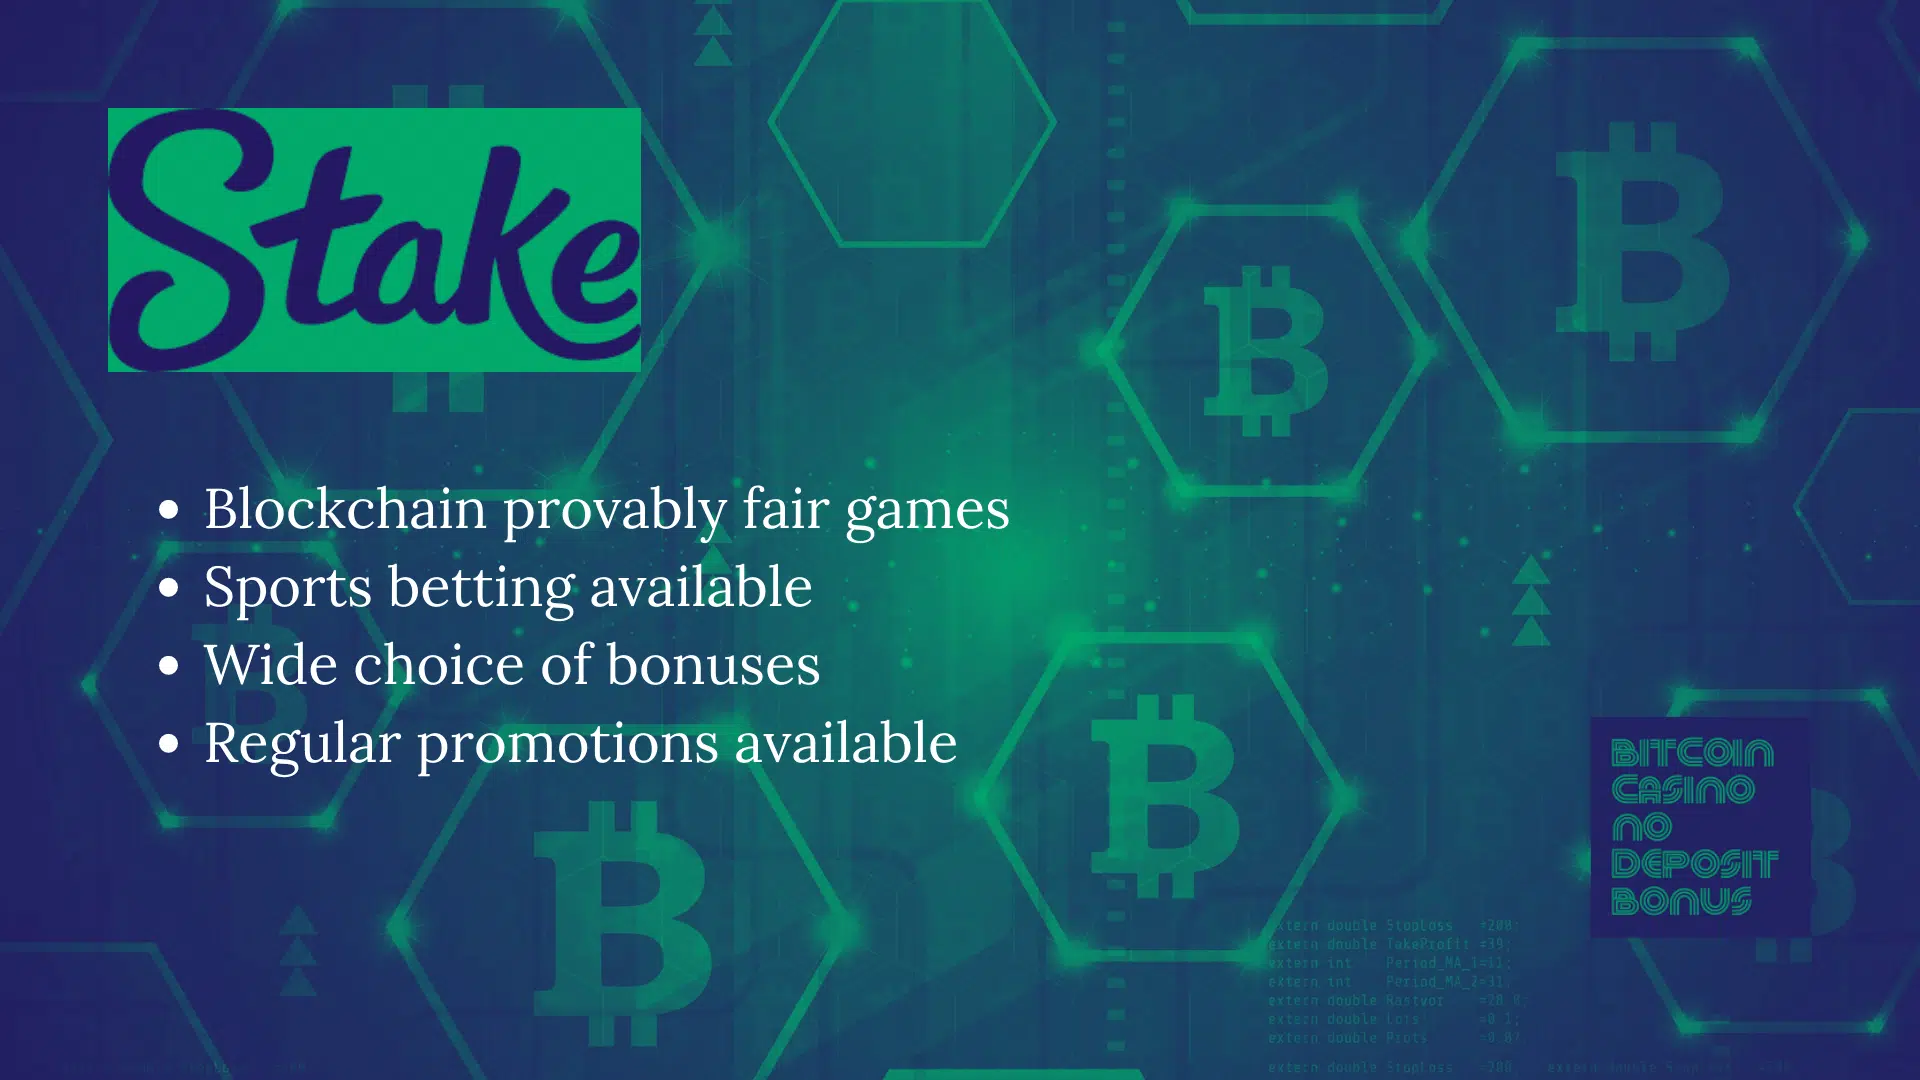 You are currently viewing Stake Casino Promo Codes December 2022 – Stake.com Bonus Code